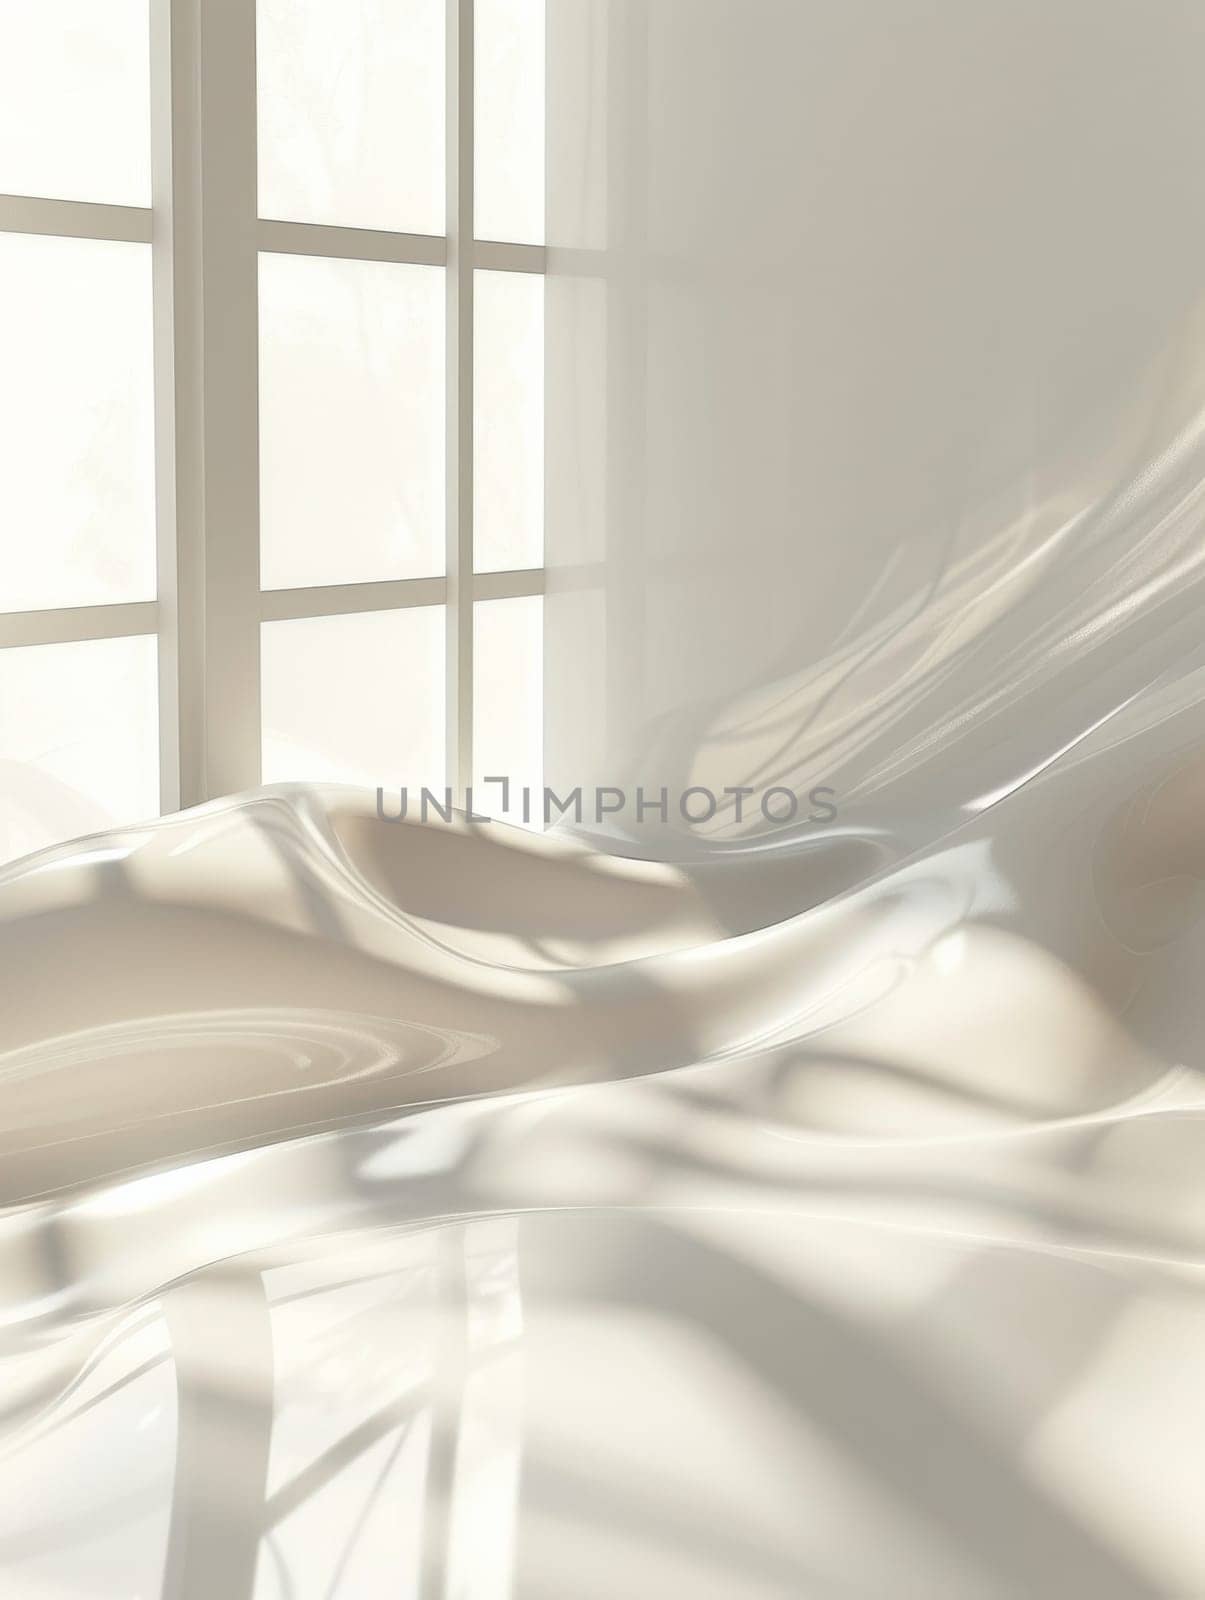 A white sheet of plastic is draped over a chair by itchaznong